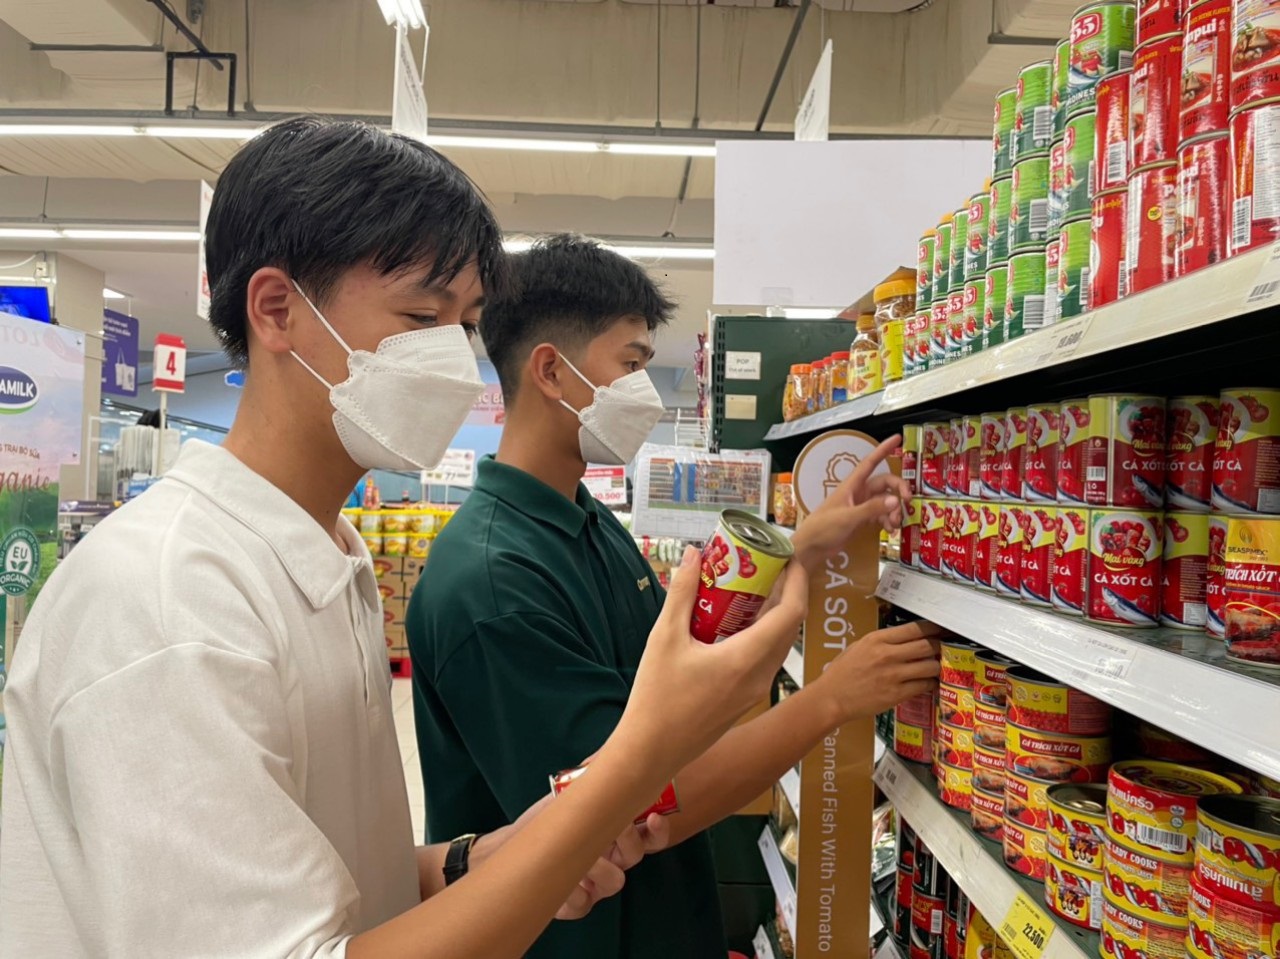 Trade - service is one of the pillars of Da Nang’s economic development. People are observed buying goods at Lotte Mart in Da Nang. Photo: QUYNH TRANG